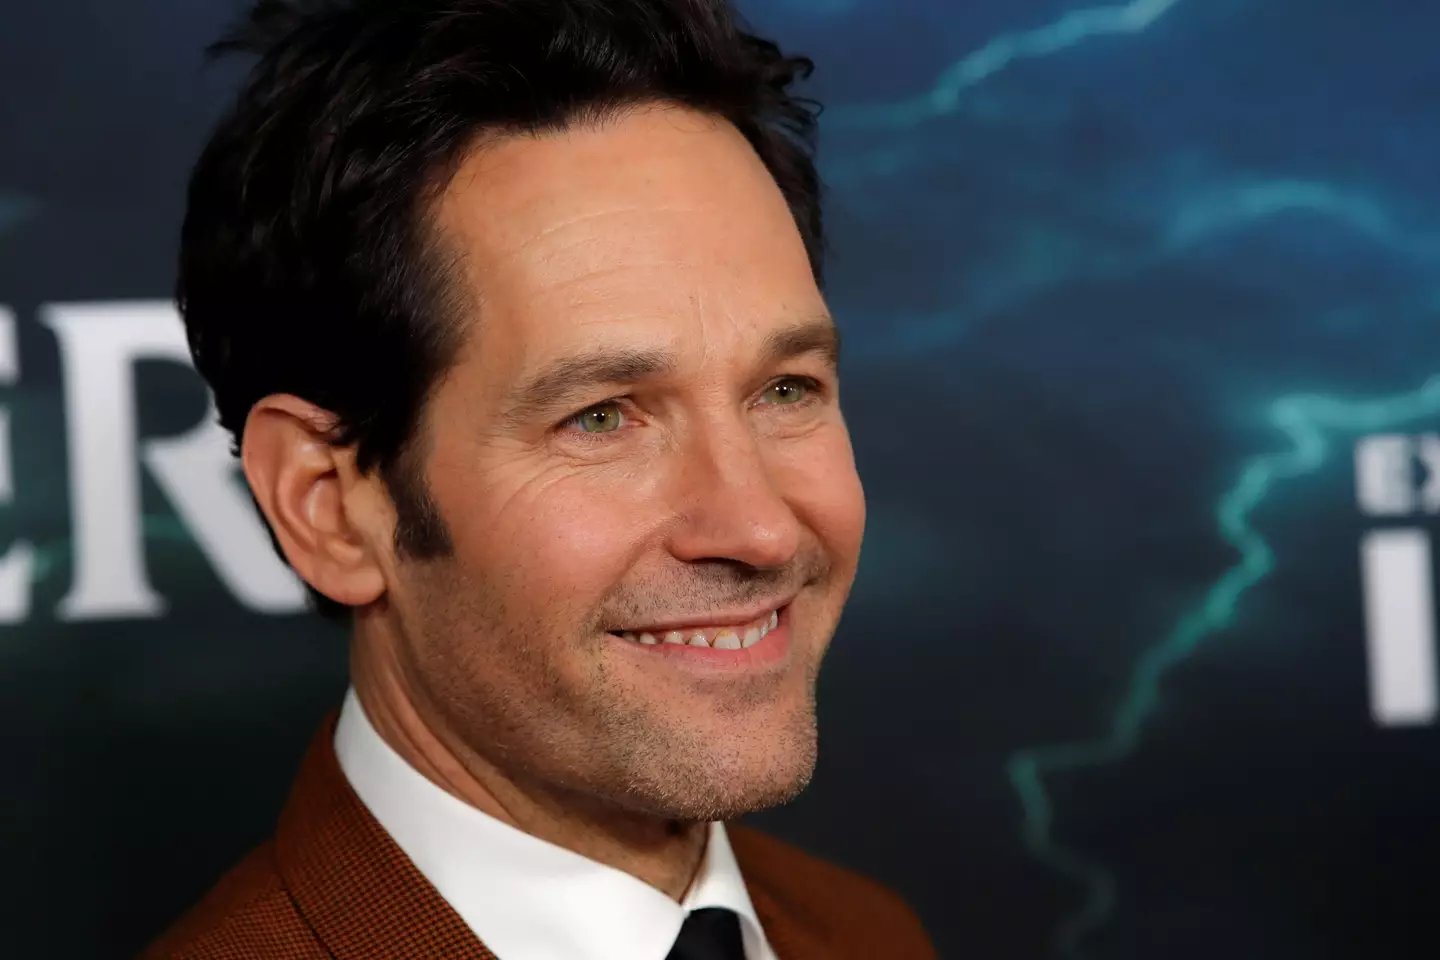 Paul Rudd has reached out to a schoolboy after none of his classmates signed his yearbook.